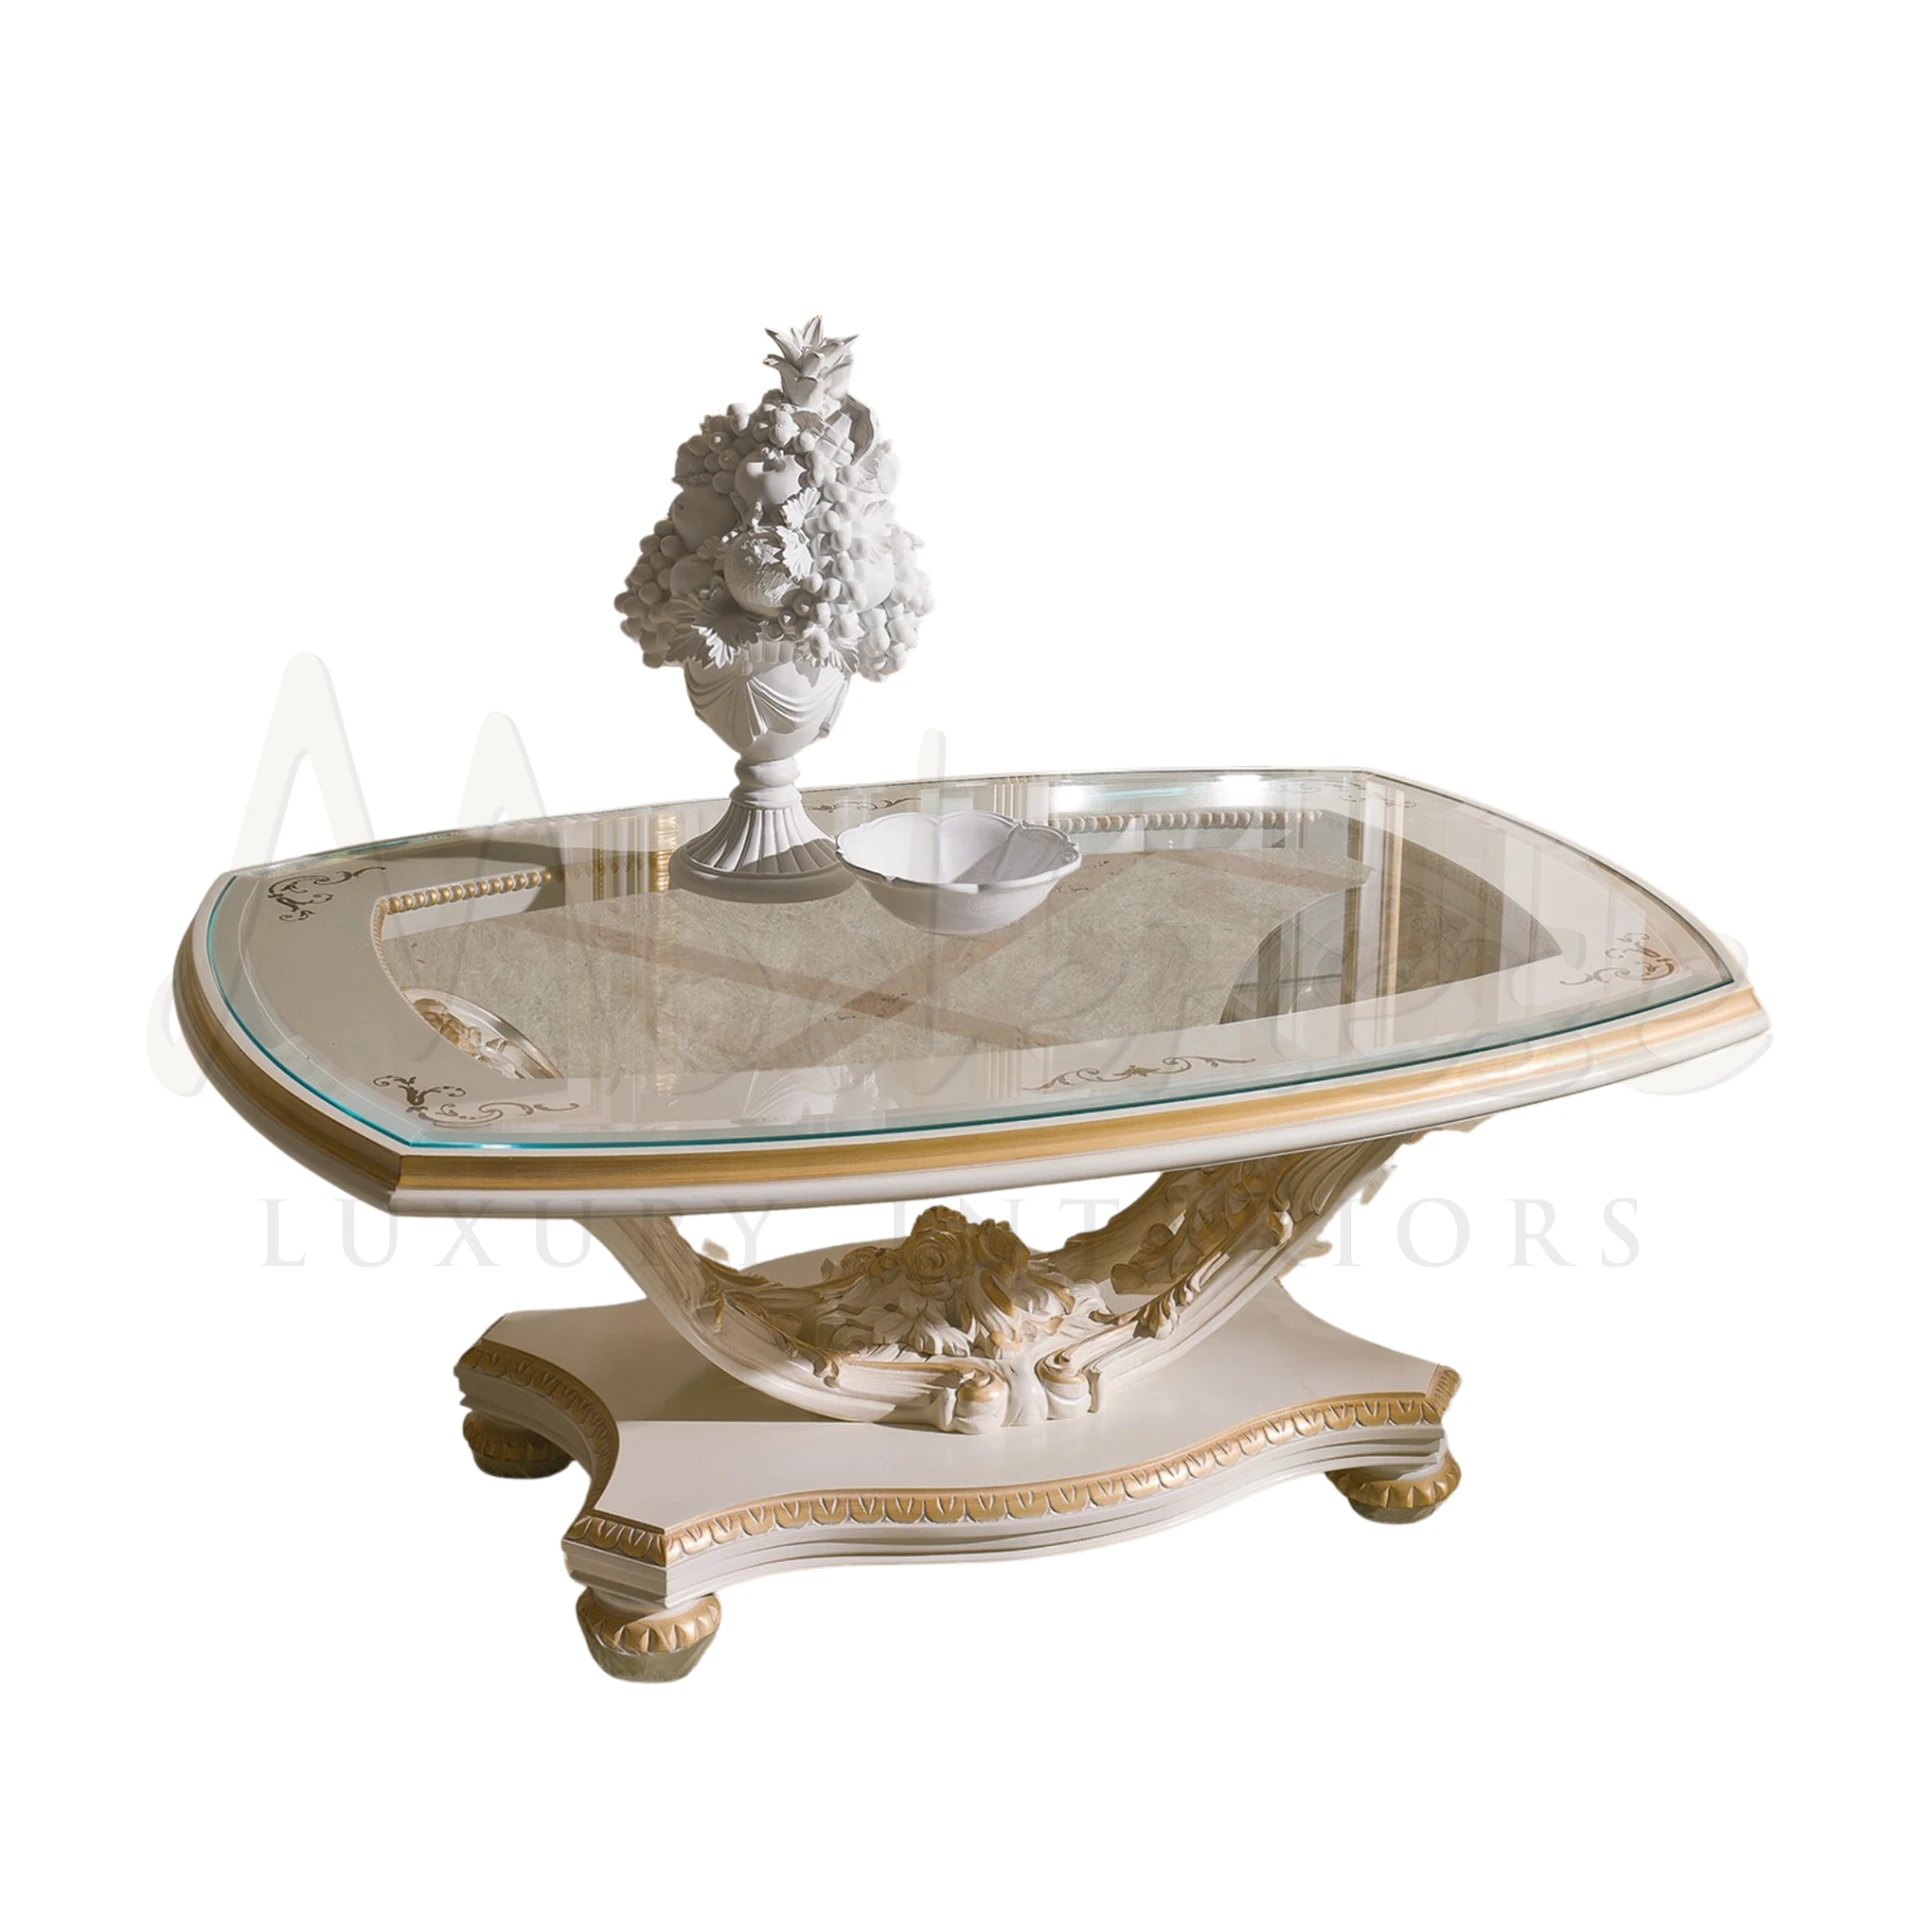 Luxury Classic Oval Coffee Table, timeless elegance for sophisticated interiors.